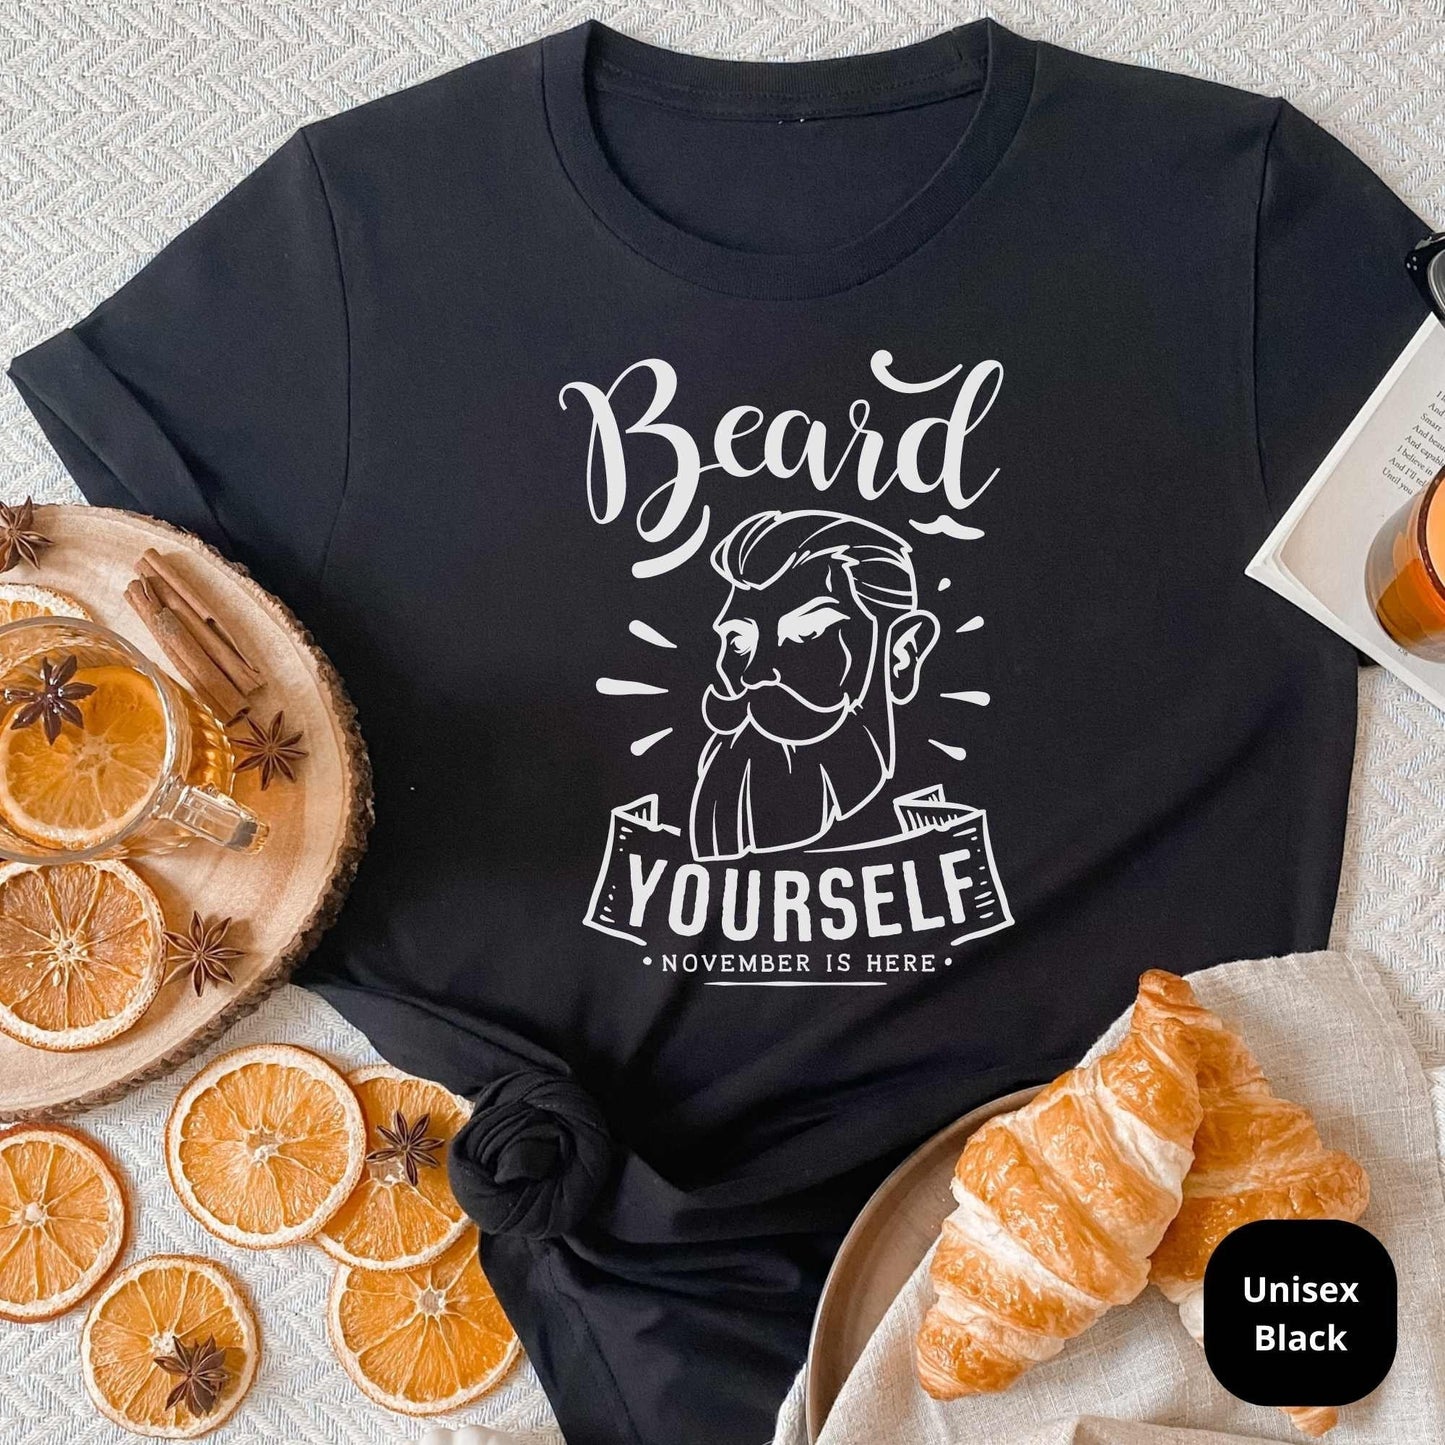 Beard Yourself Shirt - Funny Beard Lover Shirt for New Dad Gift - Father Gift - Christmas Gift - Fathers Day Gift - Birthday Gift for Dad HMDesignStudioUS